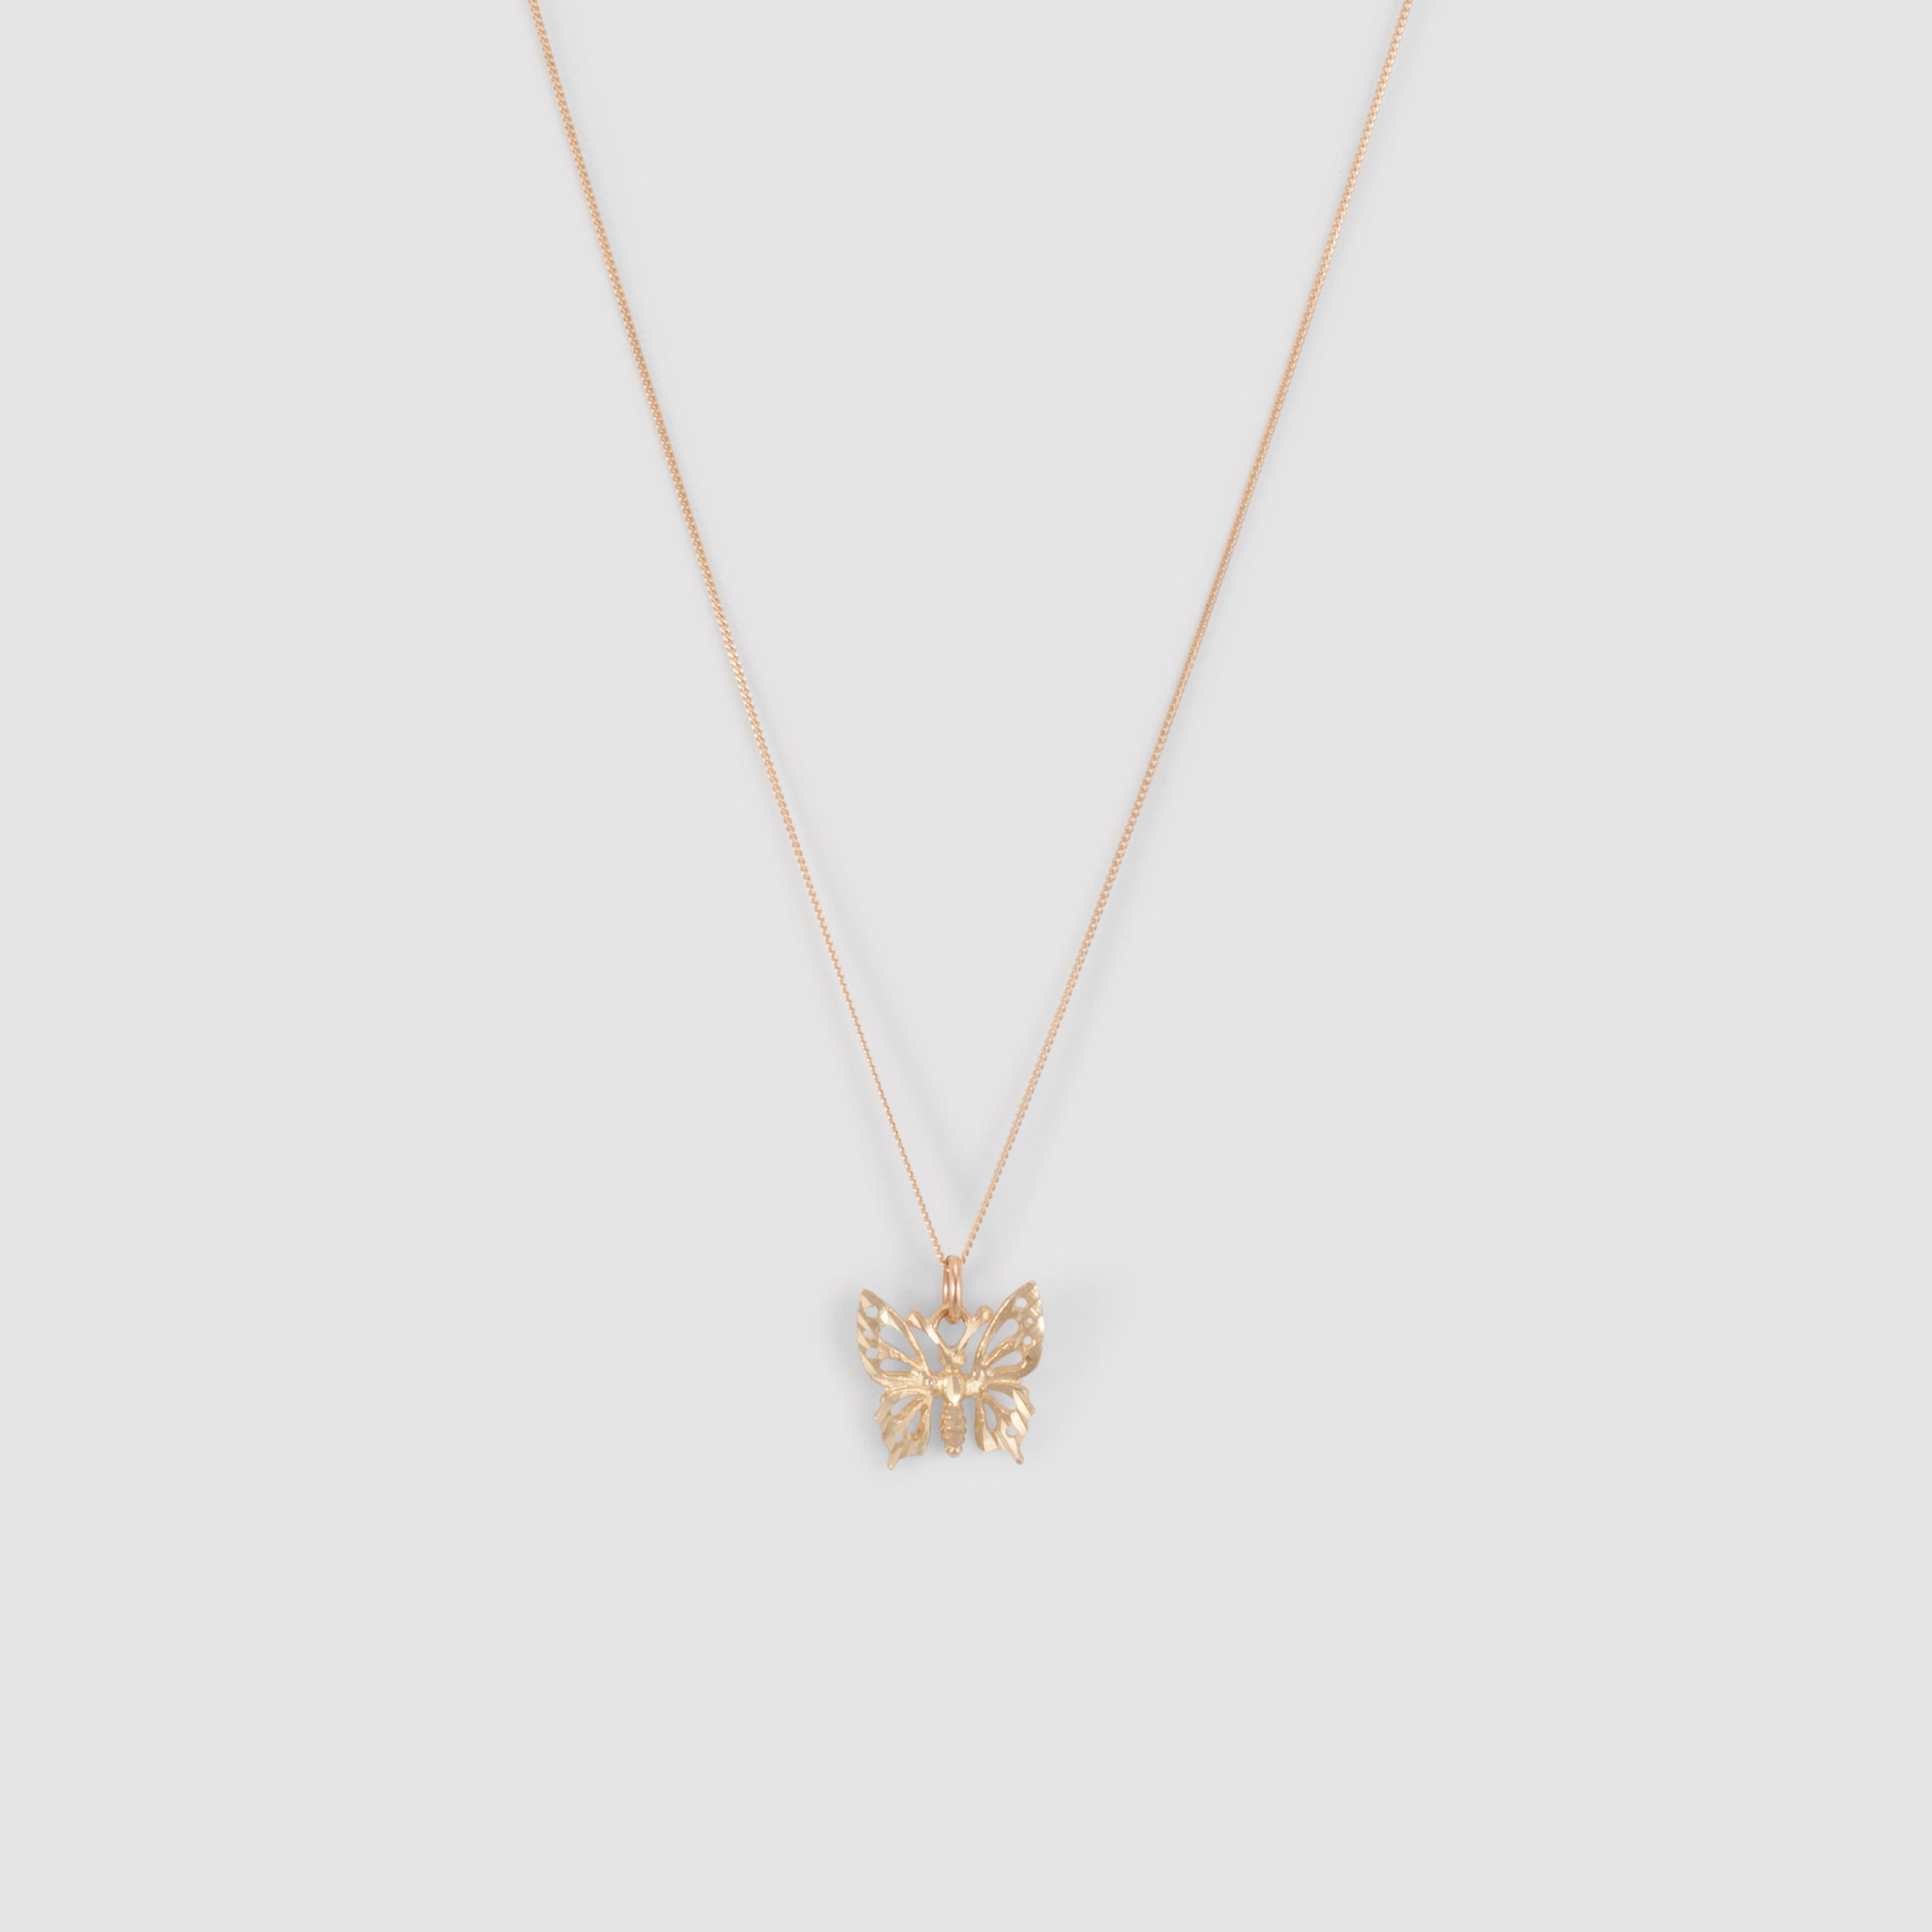 10k yellow gold large butterfly pendant with diamond cut detail. On a thin curb chain